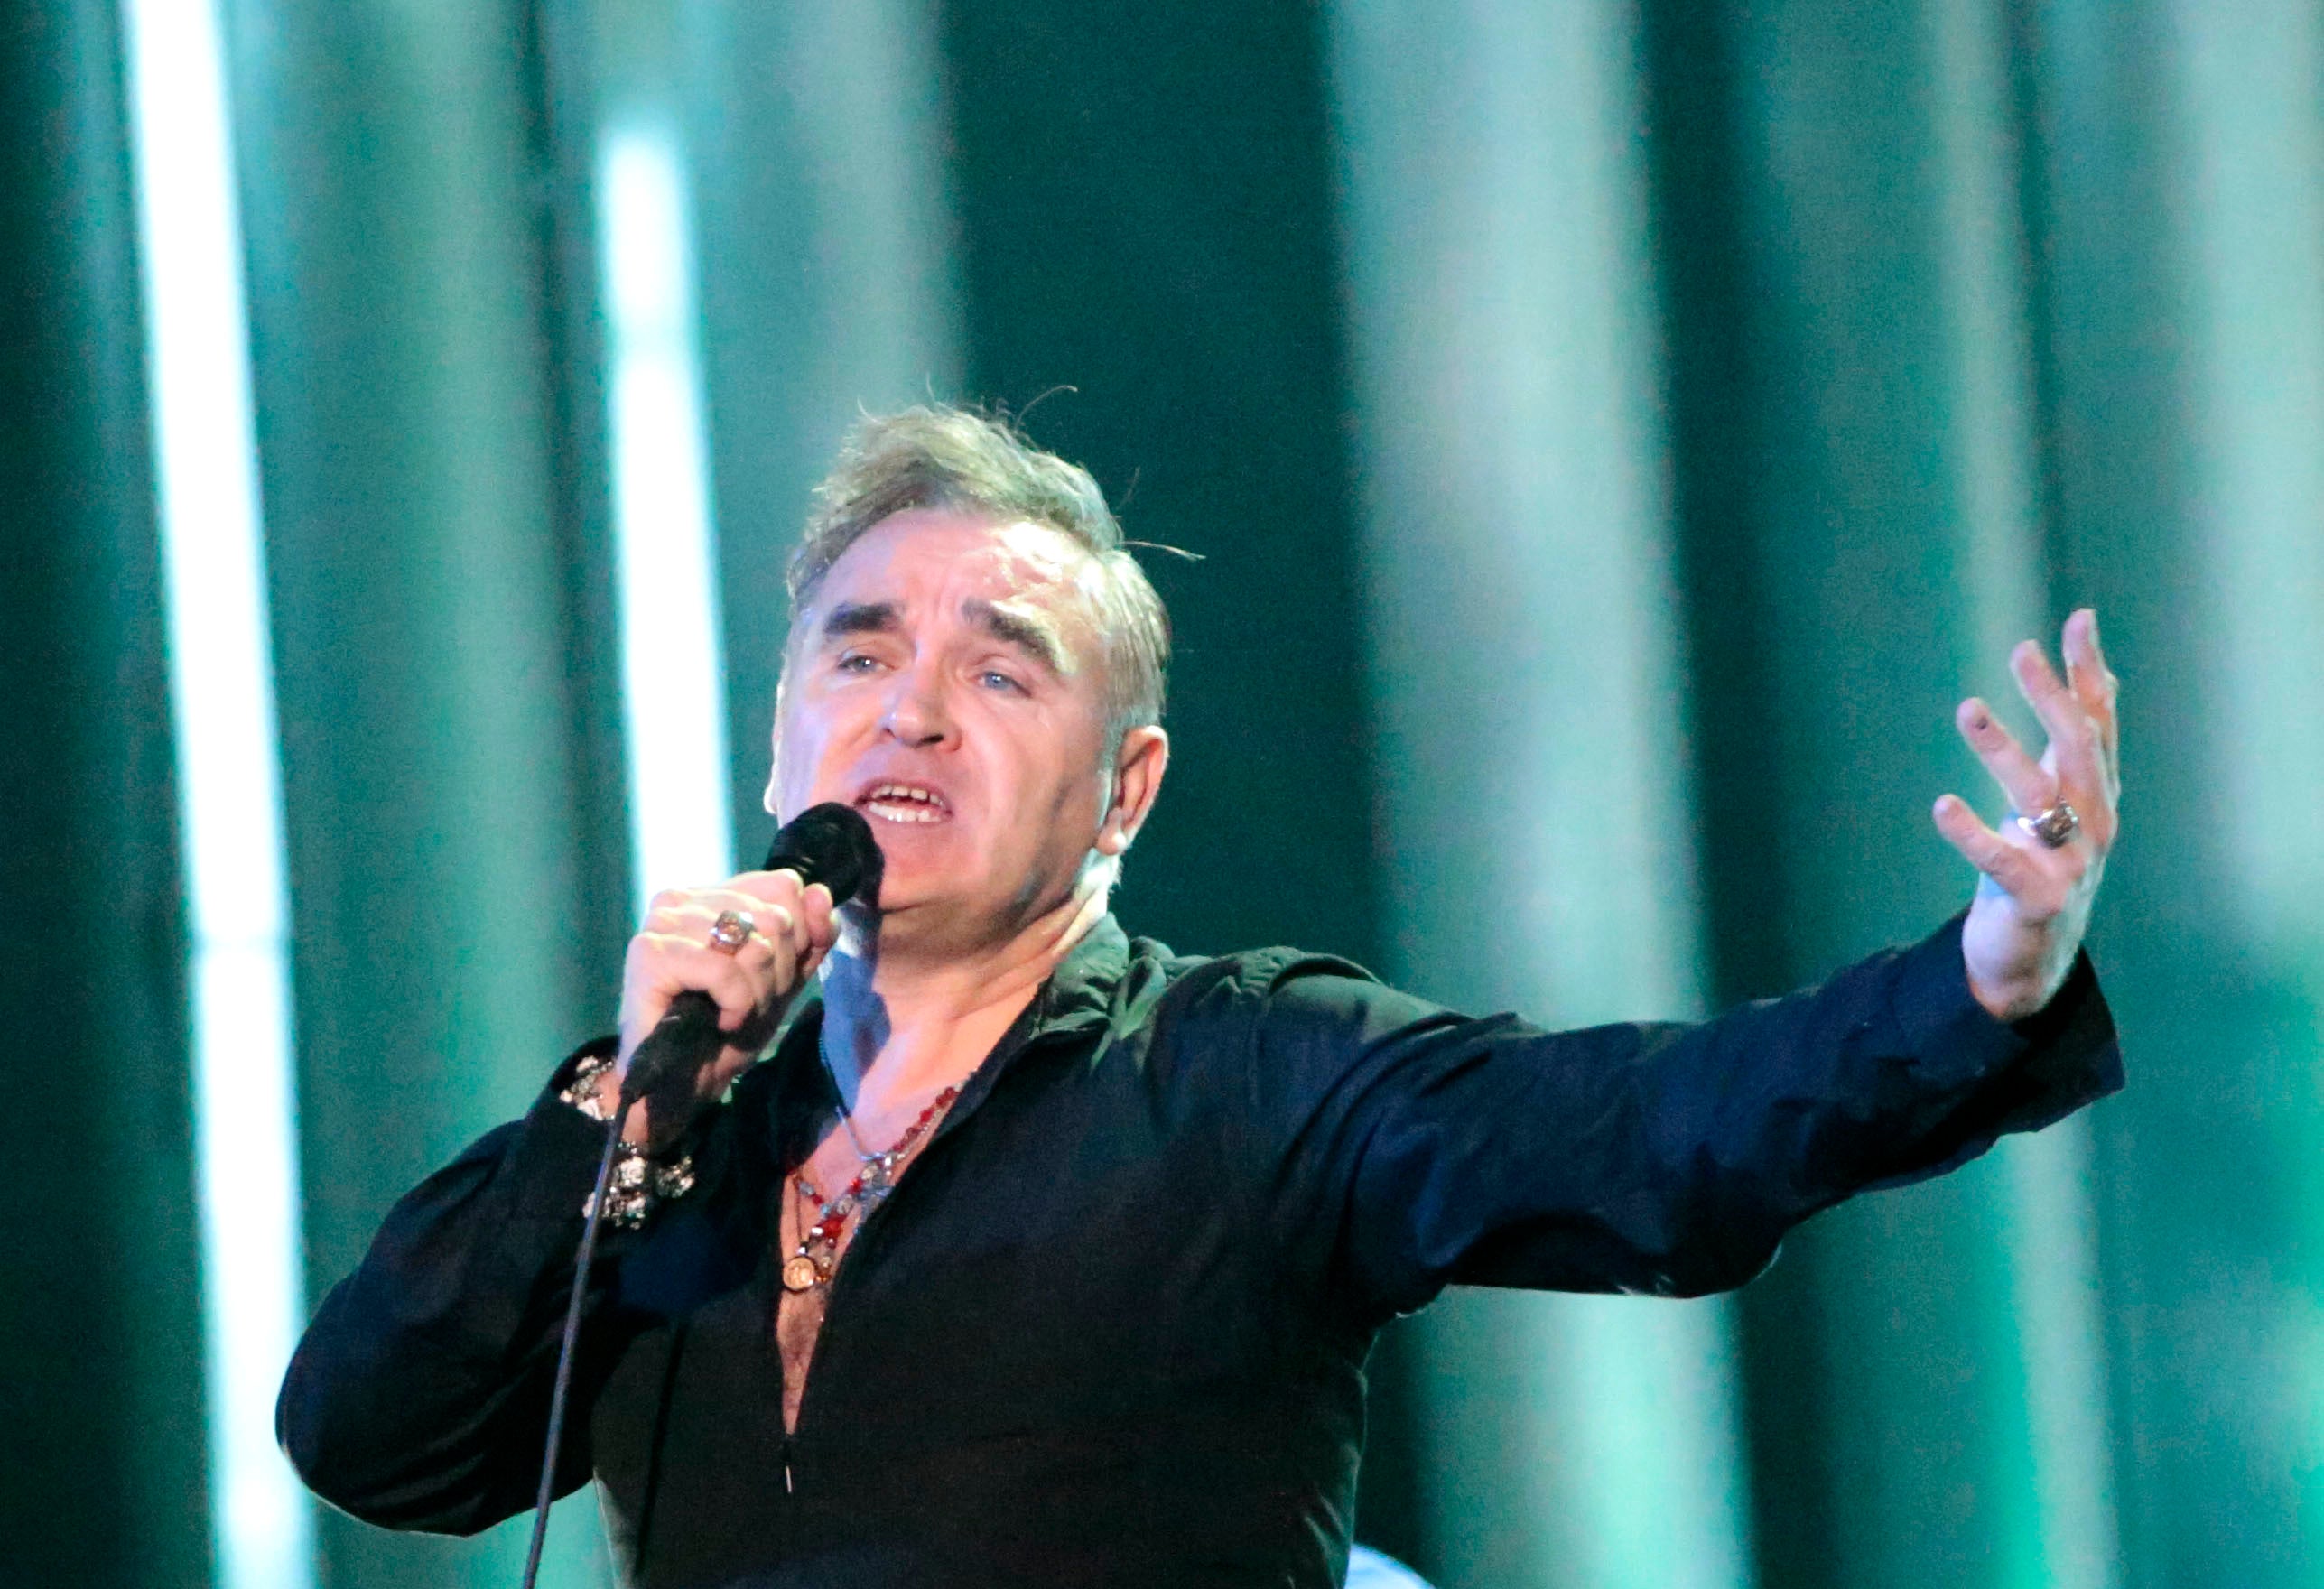 Morrissey’s journey from the ‘voice of the outsider’ to supporter of far-right political party For Britain has been much discussed and written about